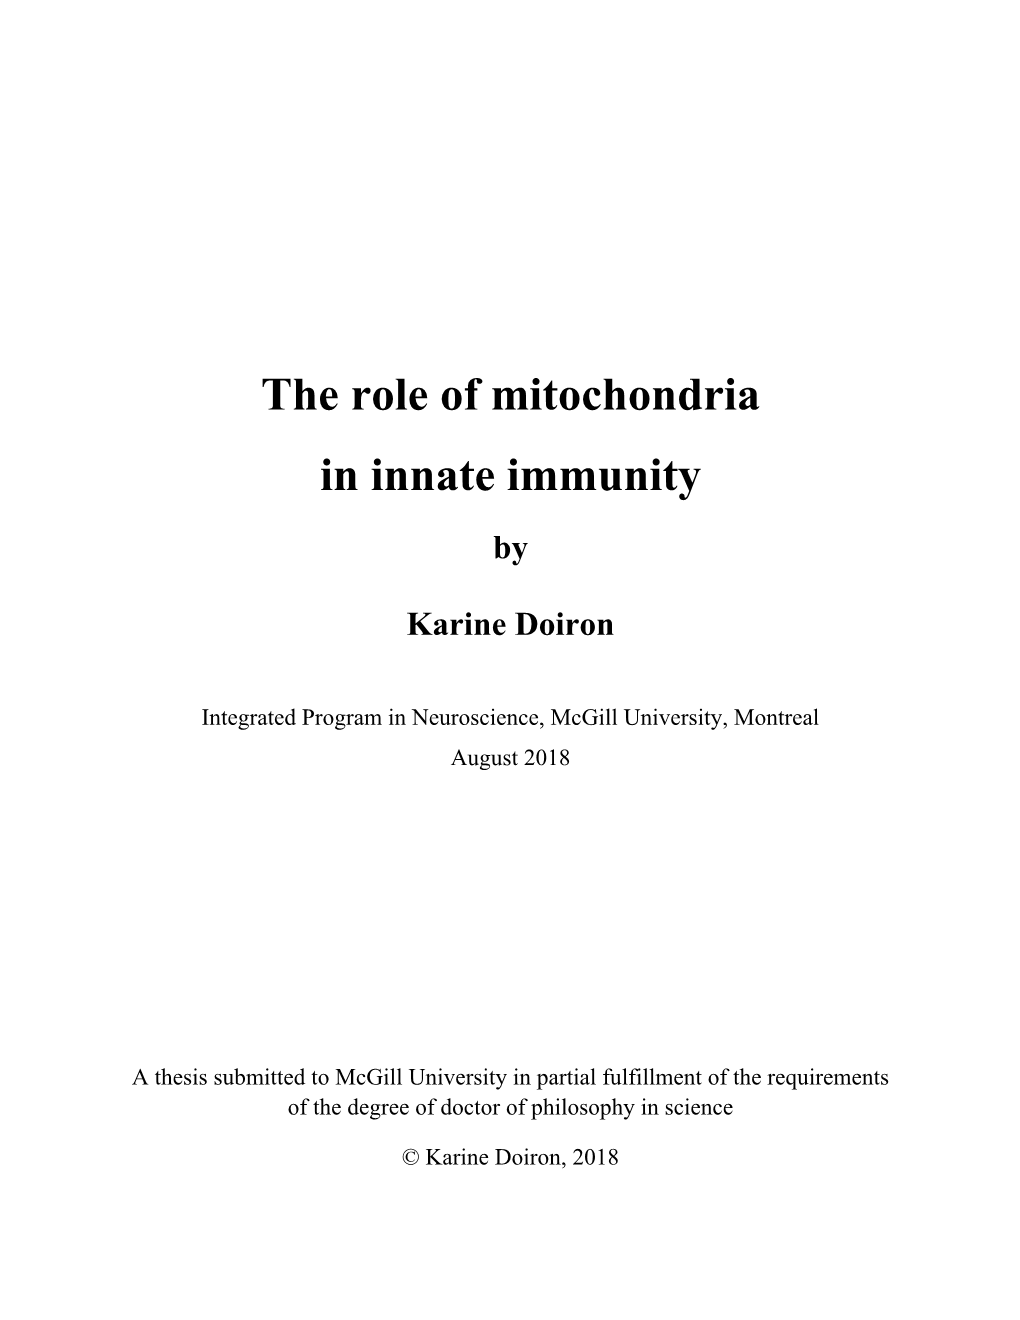 The Role of Mitochondria in Innate Immunity By